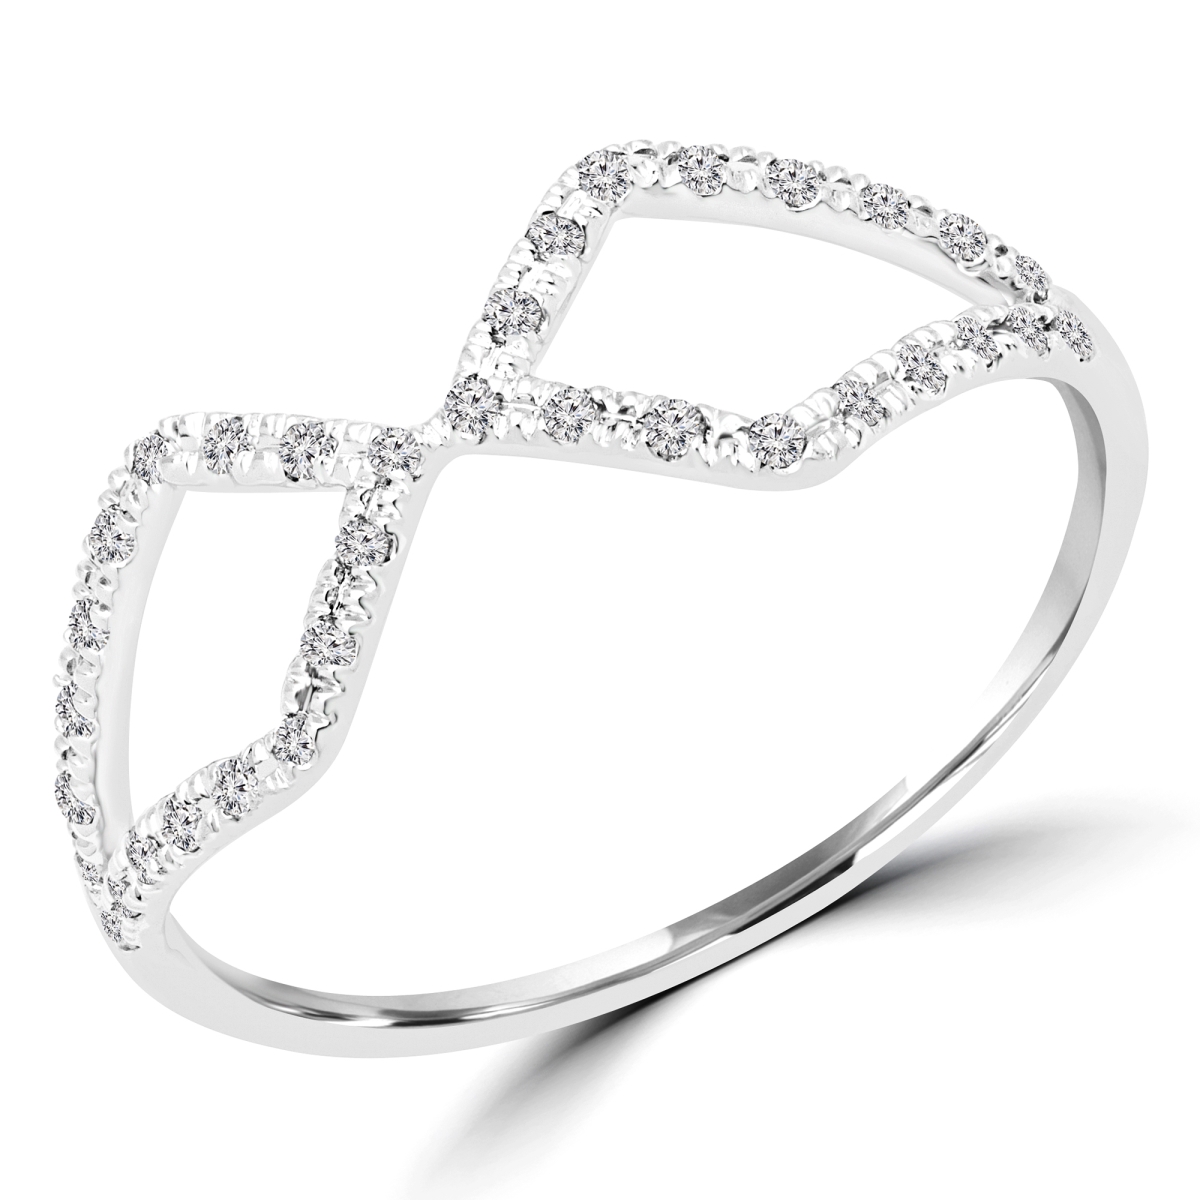 Picture of Majesty Diamonds MDR170055-8.75 0.13 CTW Round Diamond Cocktail Ring in 14K White Gold - Size 8.75